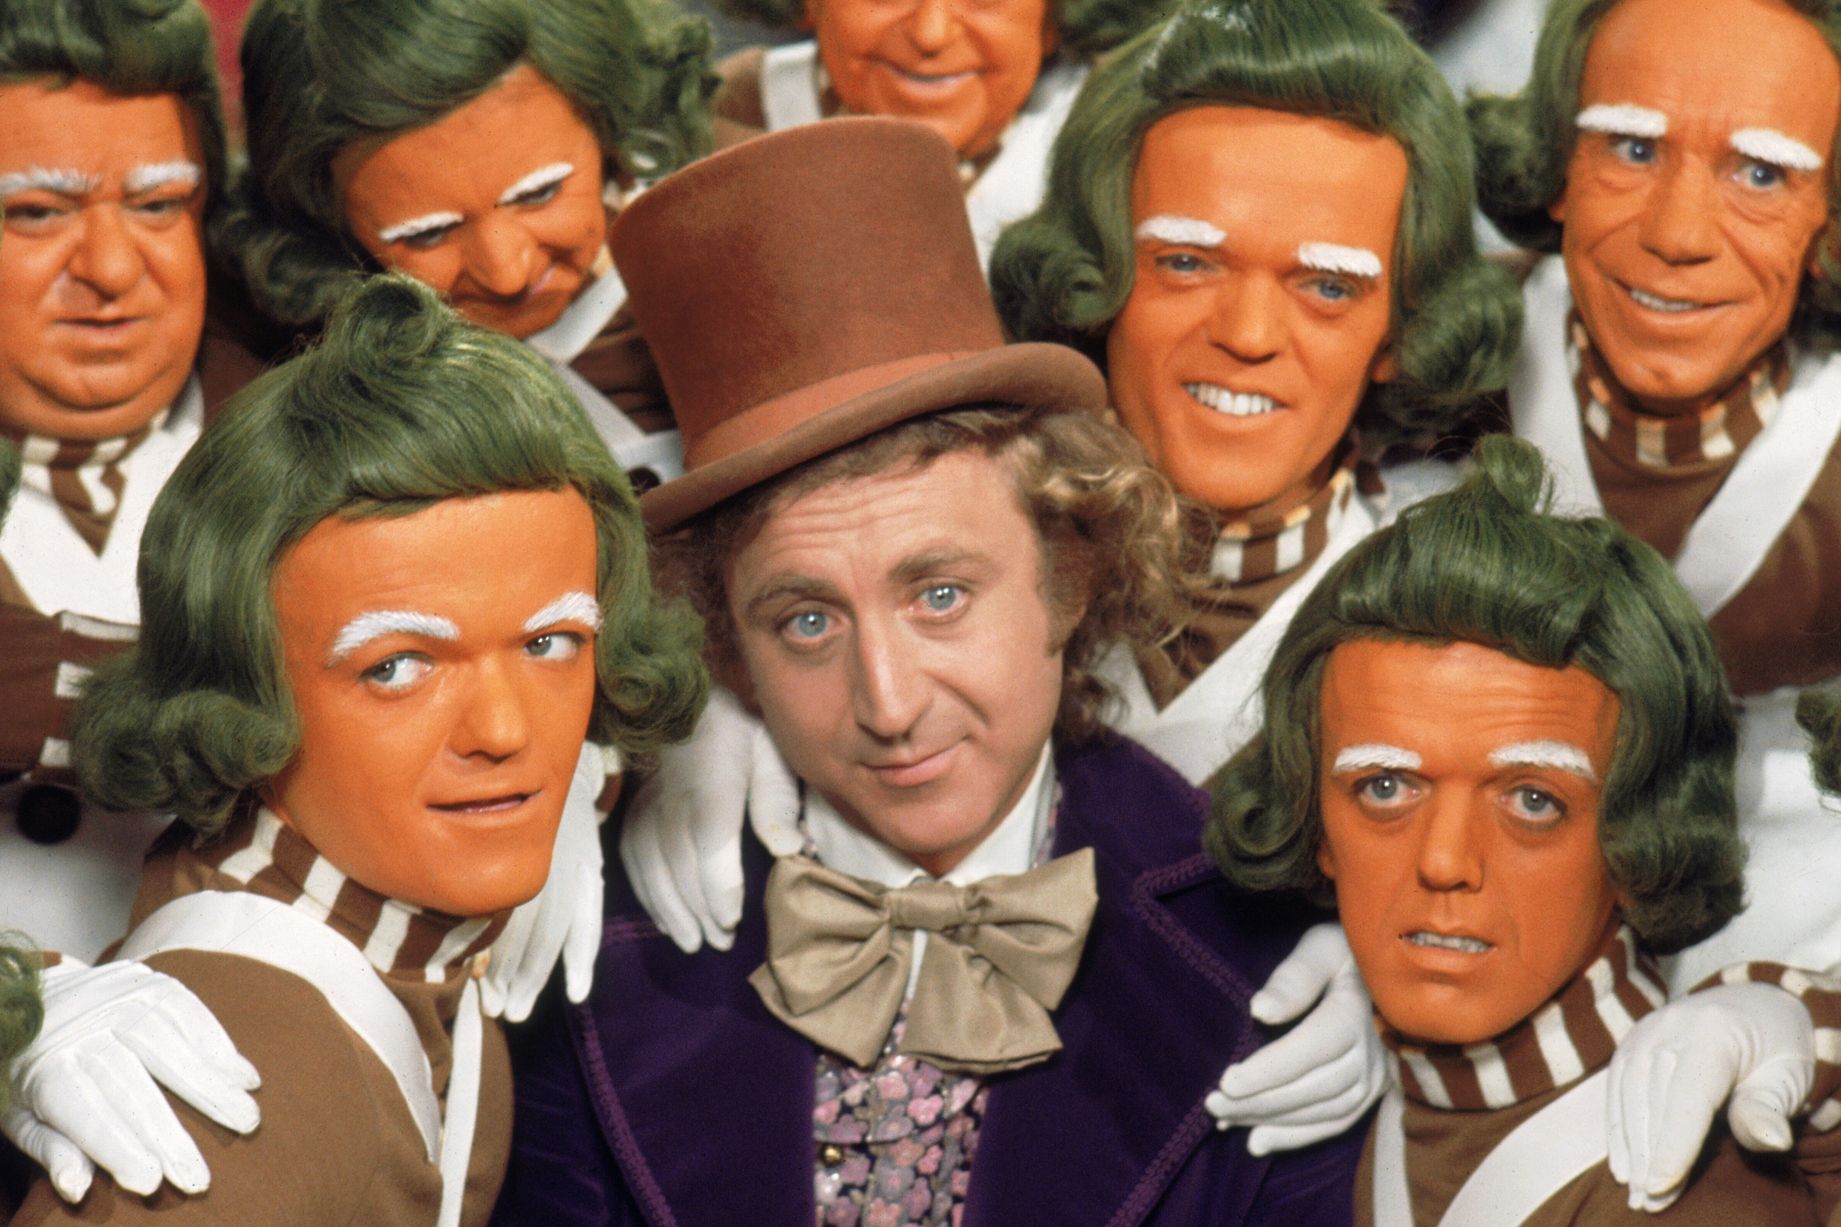 Gene-Wilder-as-Willy-Wonka-in-Charlie-and-the-Chocolate-Factory